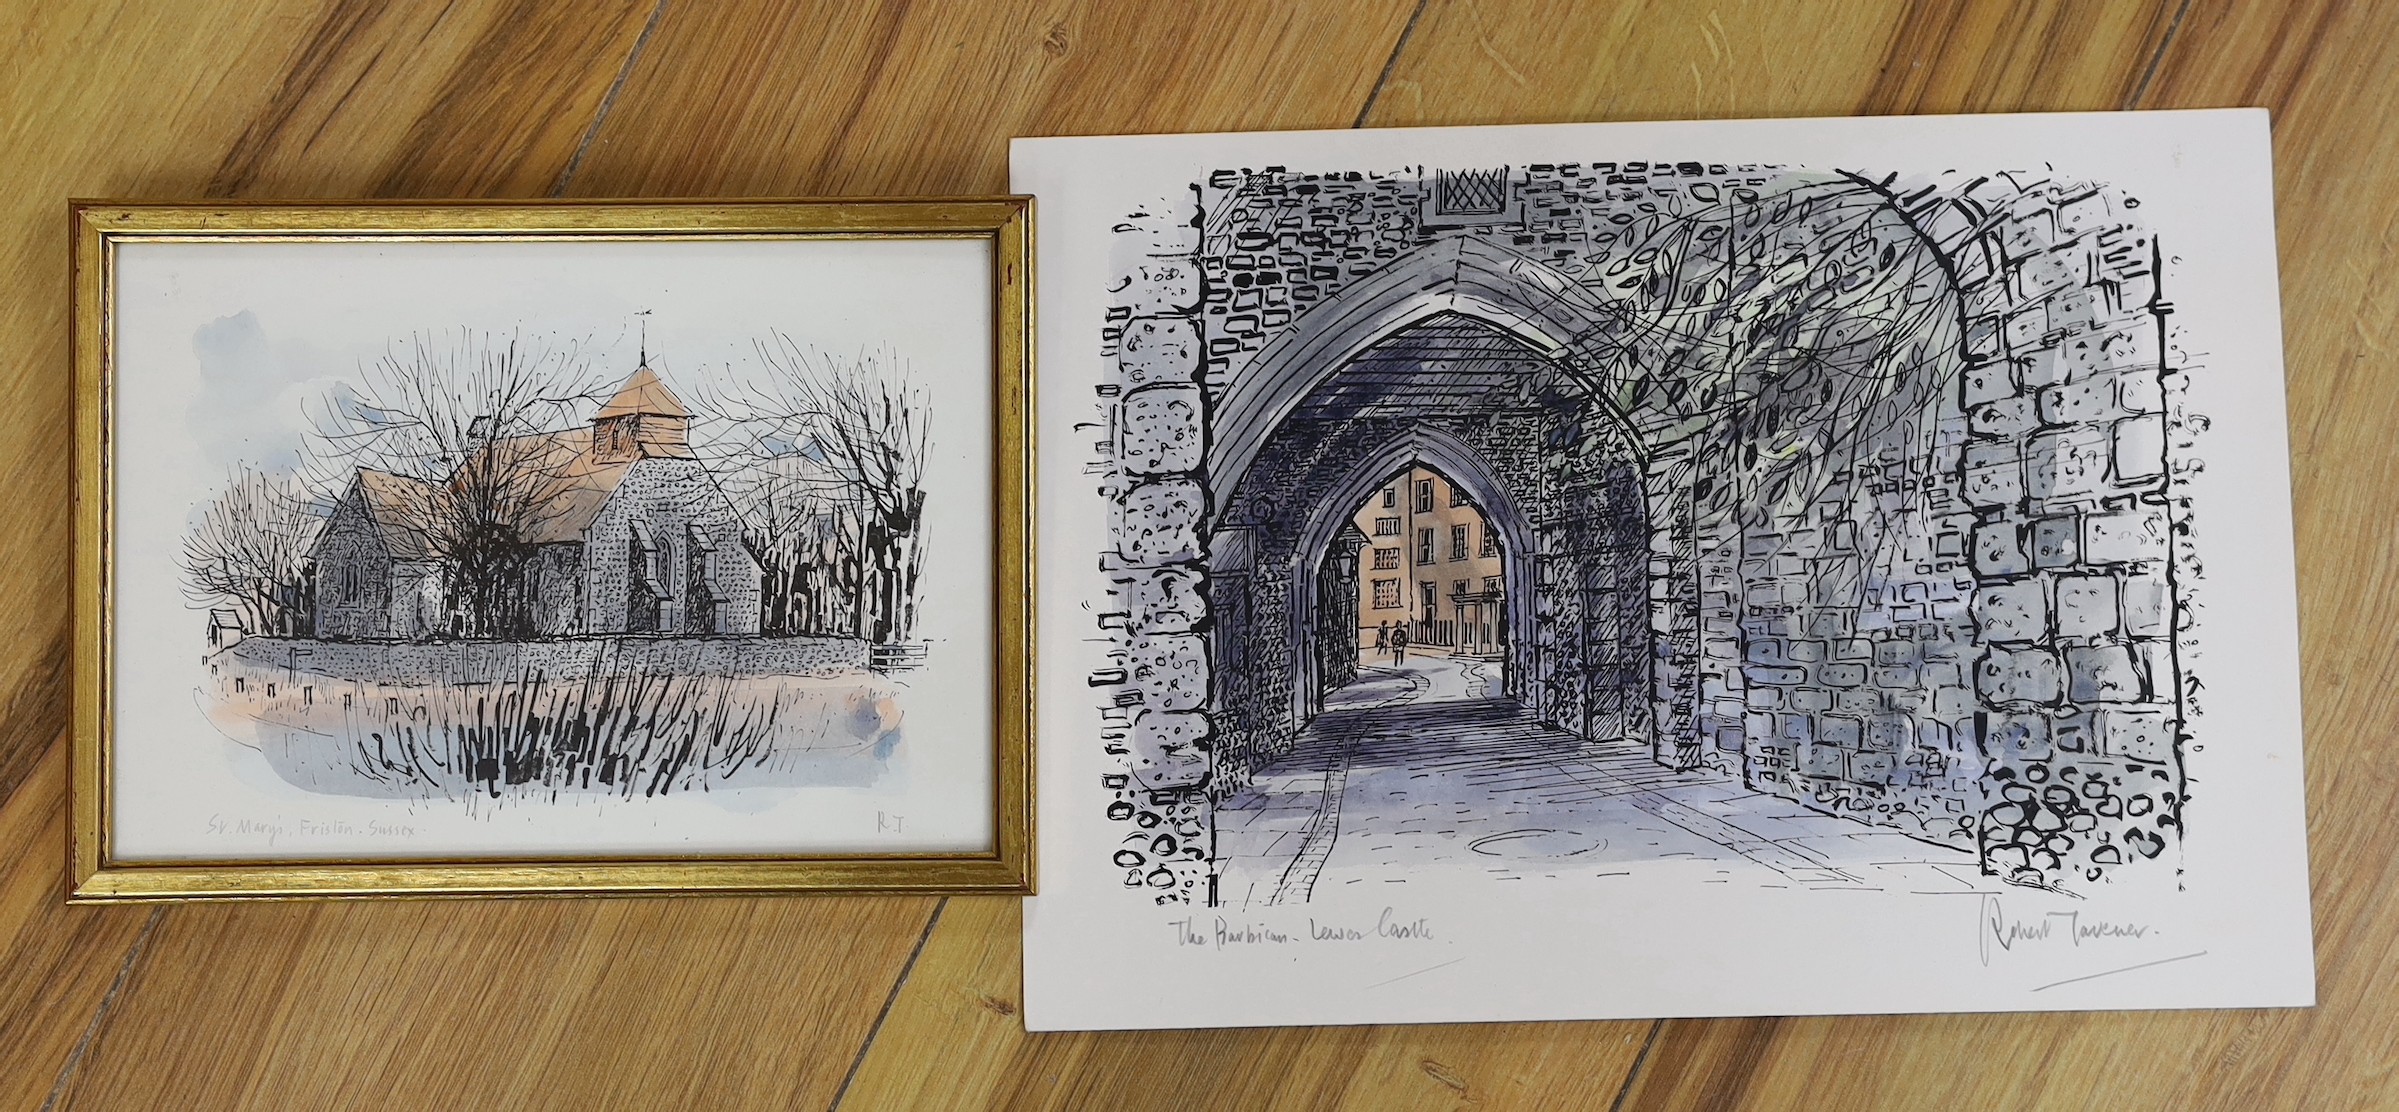 Robert Tavener (1920-2004), three hand coloured prints, 'The Barbican, Lewes Castle', 'St. Mary's, Friston, Sussex' and Downland scene, all signed and inscribed in pencil, 21 x 30cm (2) and 14 x 20cm